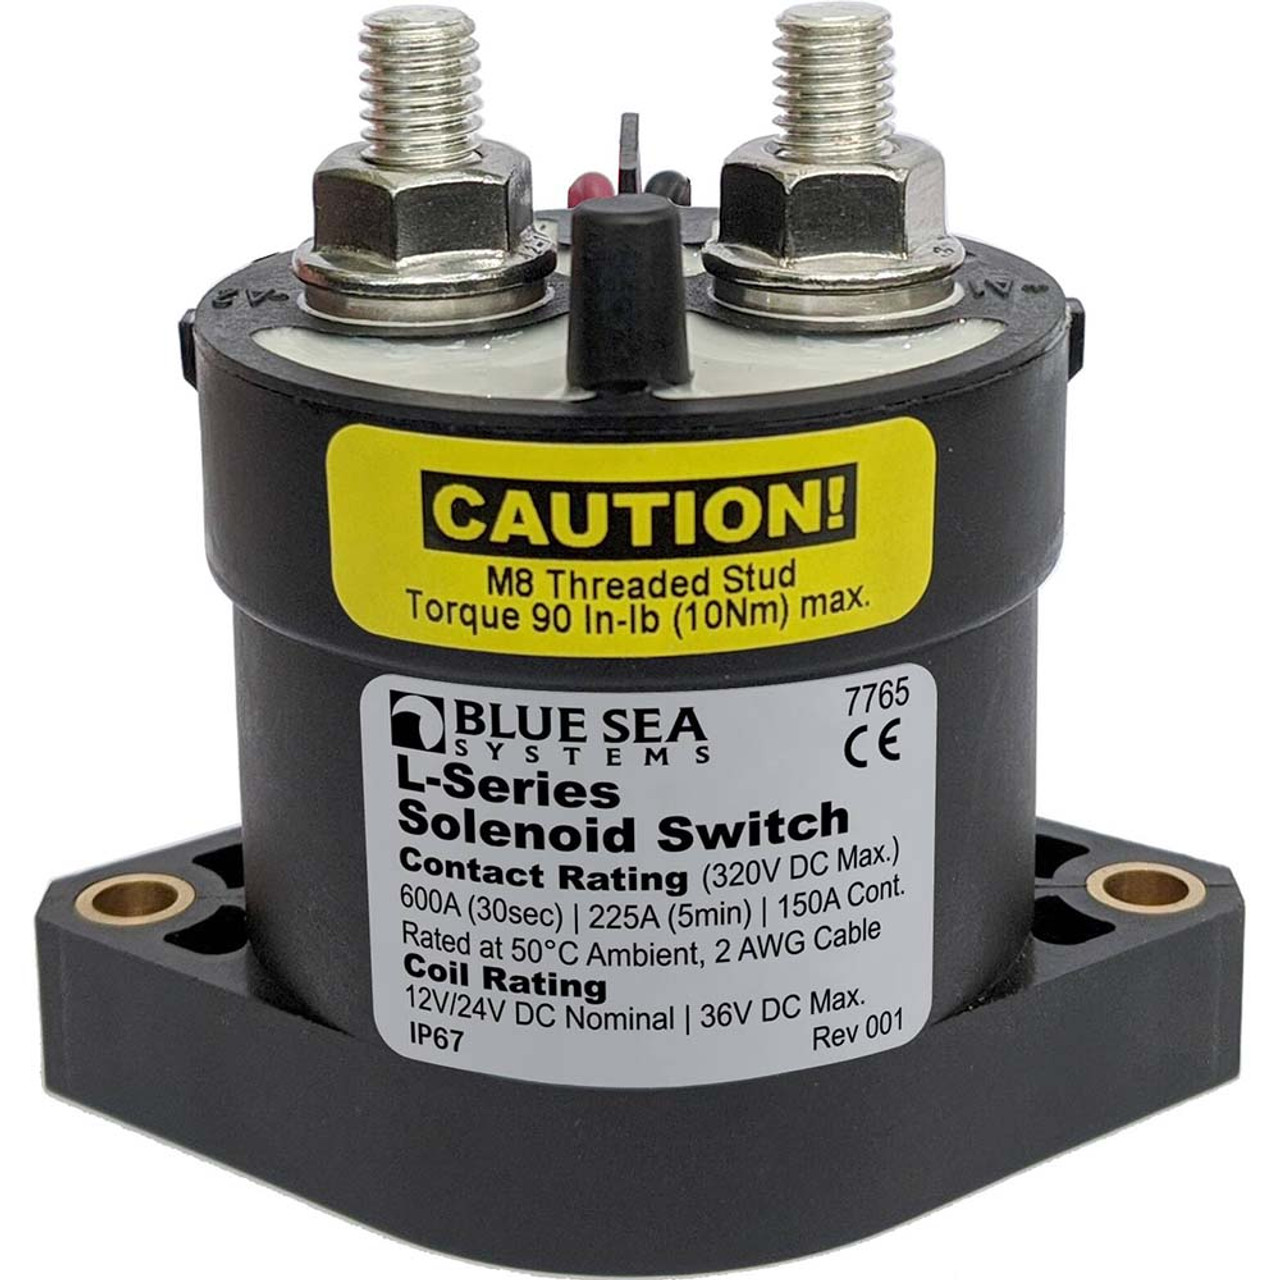 Blue Sea 7765 L-Series Solenoid Switch - 150A - 12\/24V DC [7765]